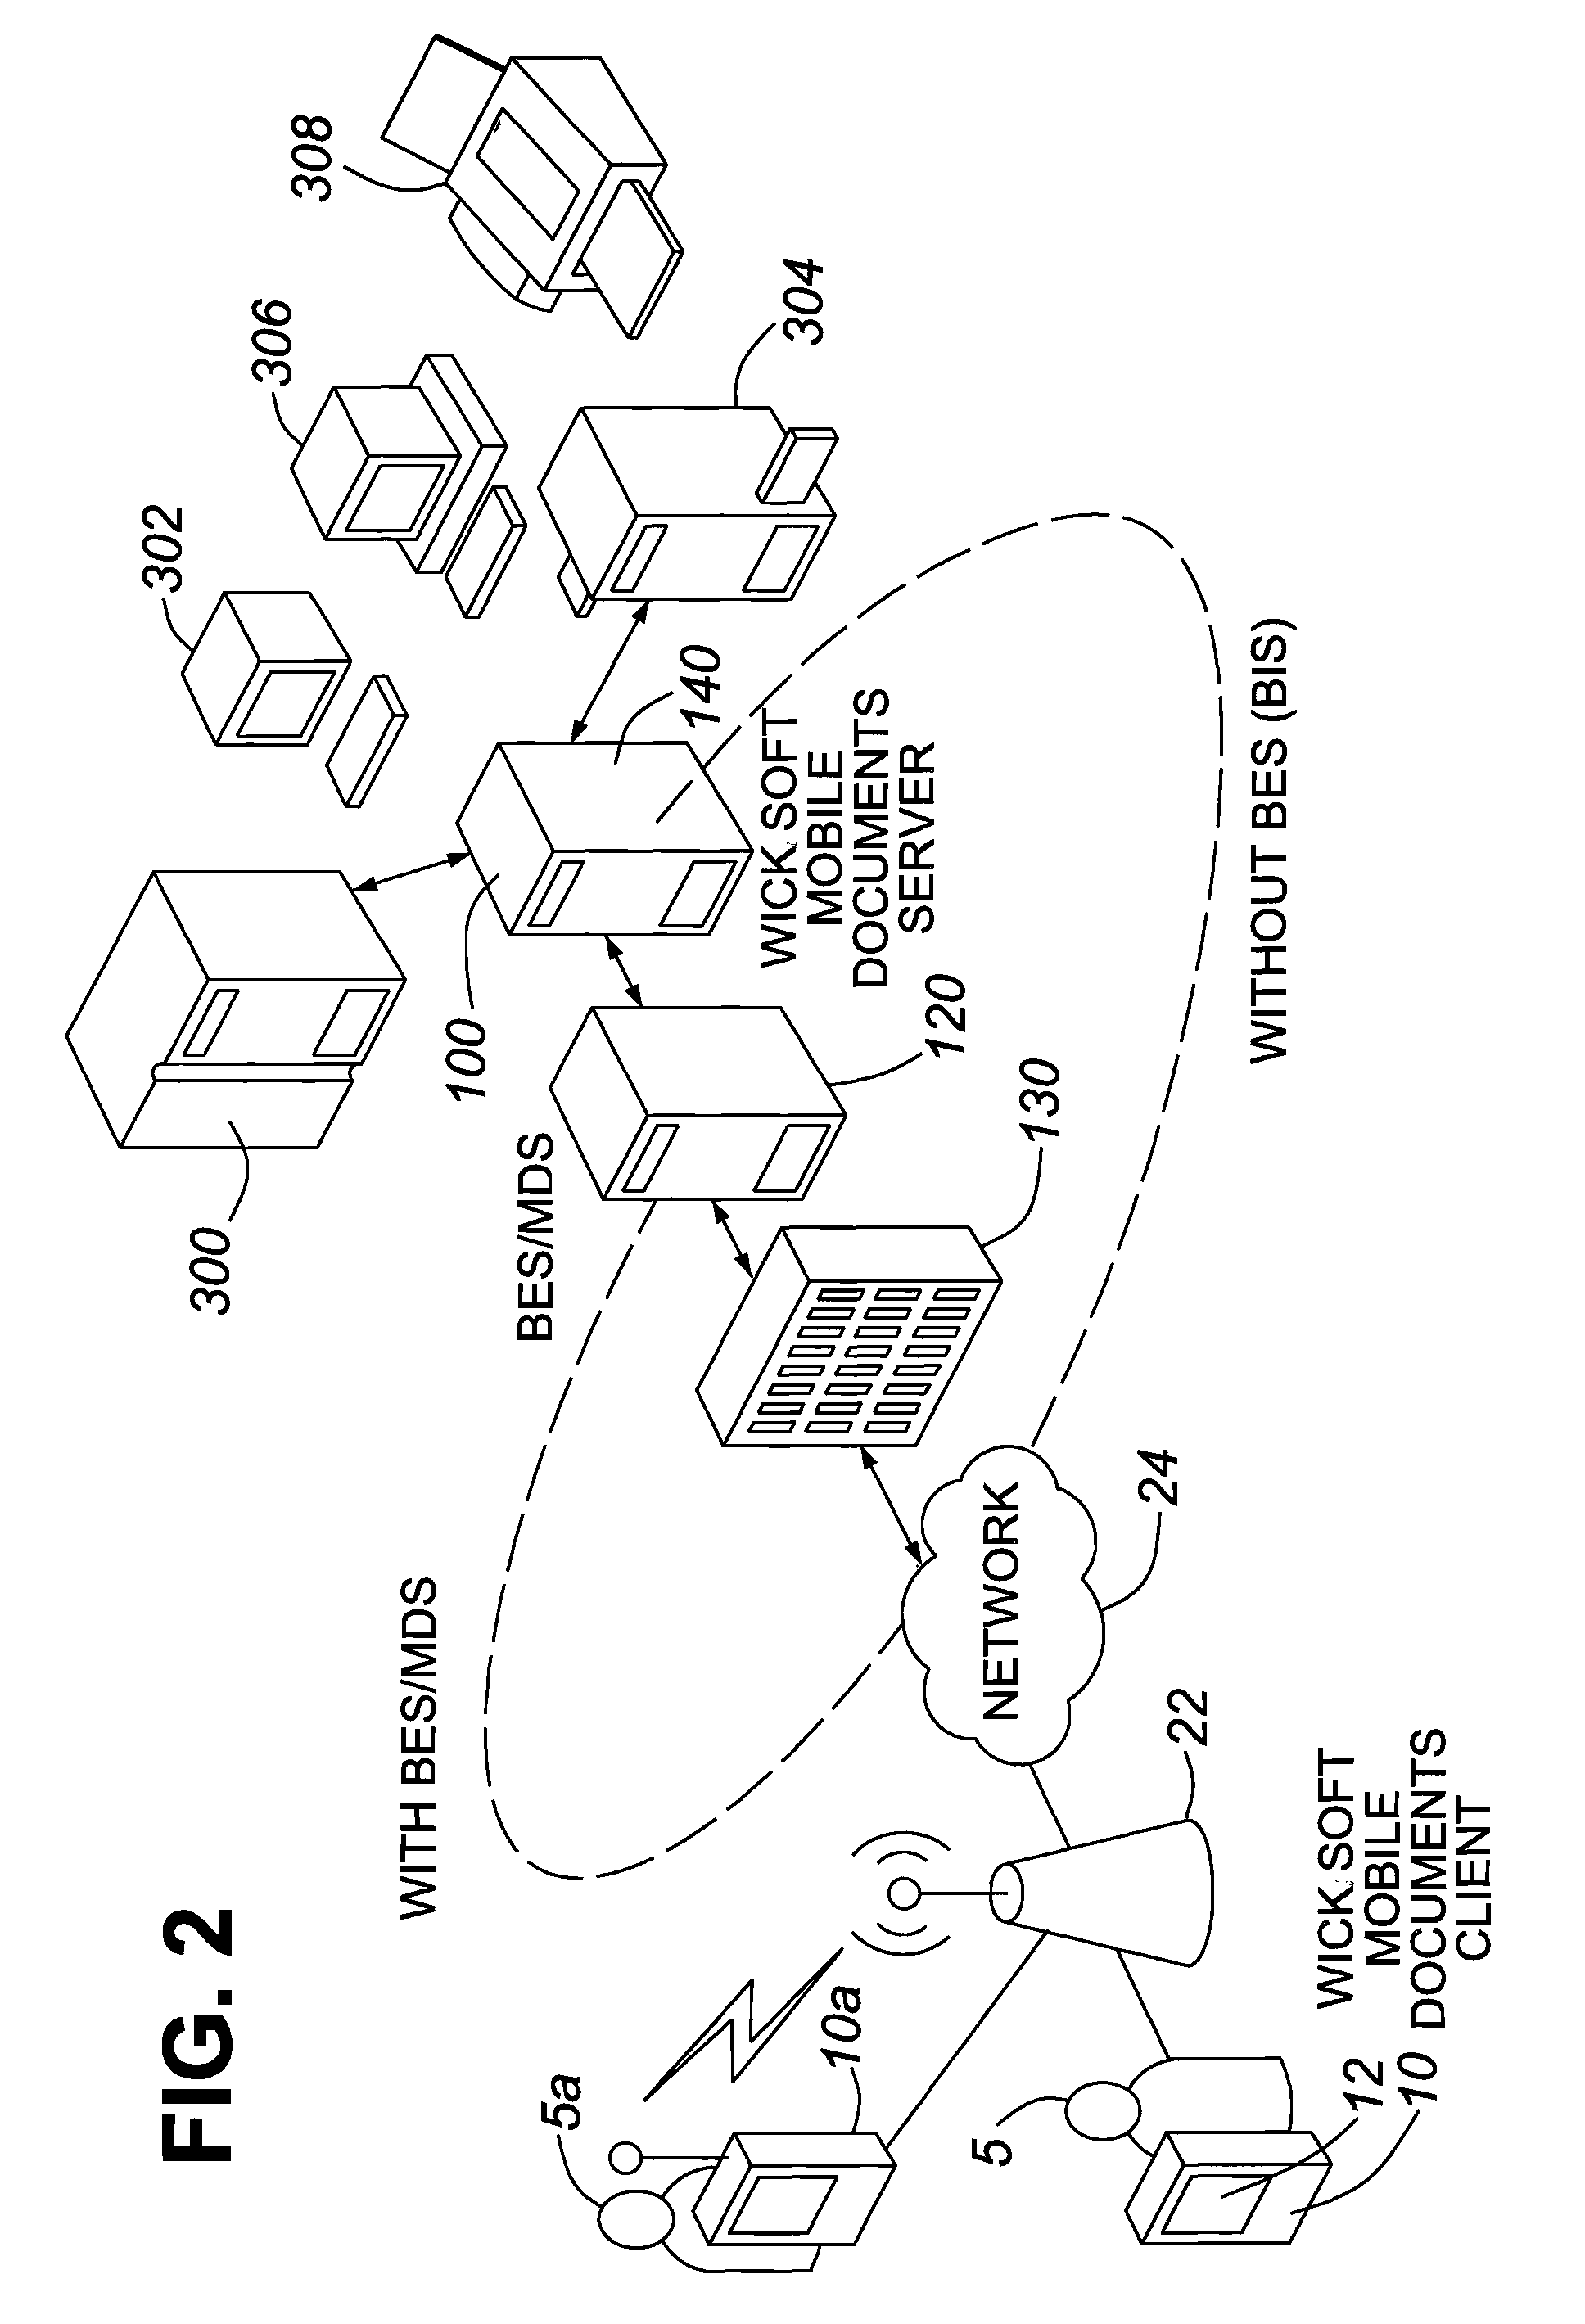 System and Method for Secure Management of Mobile User Access to Enterprise Network Resources